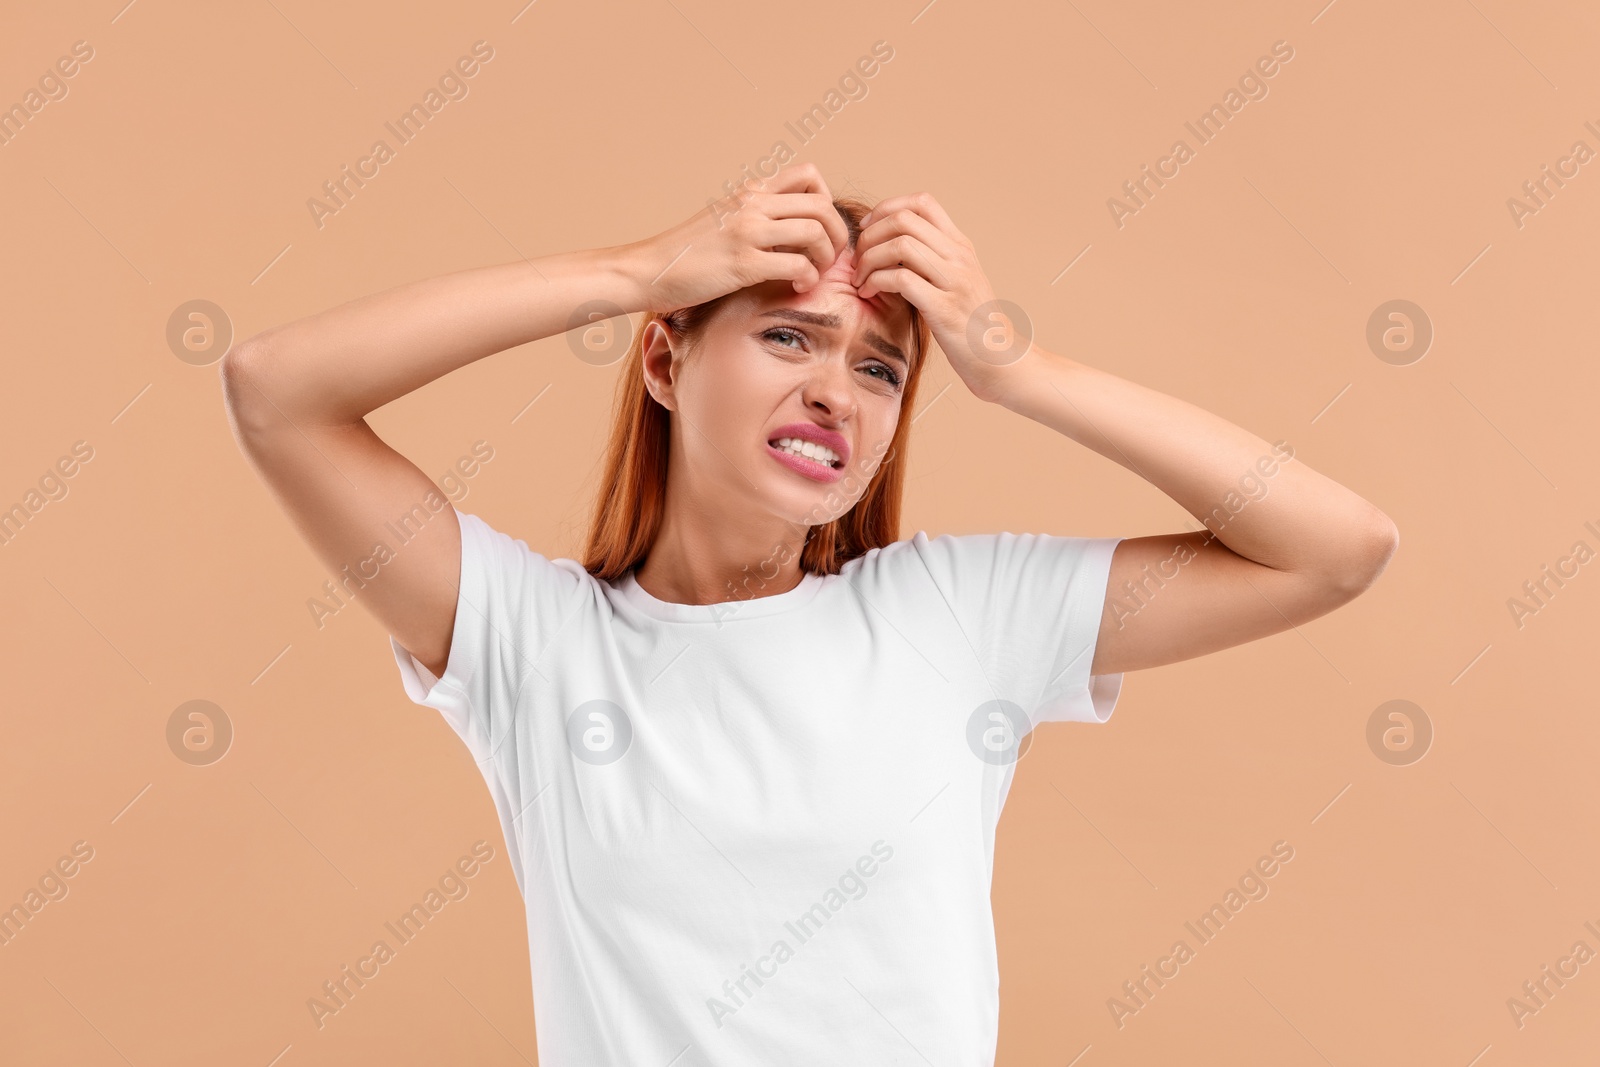 Photo of Suffering from allergy. Young woman scratching her face on beige background